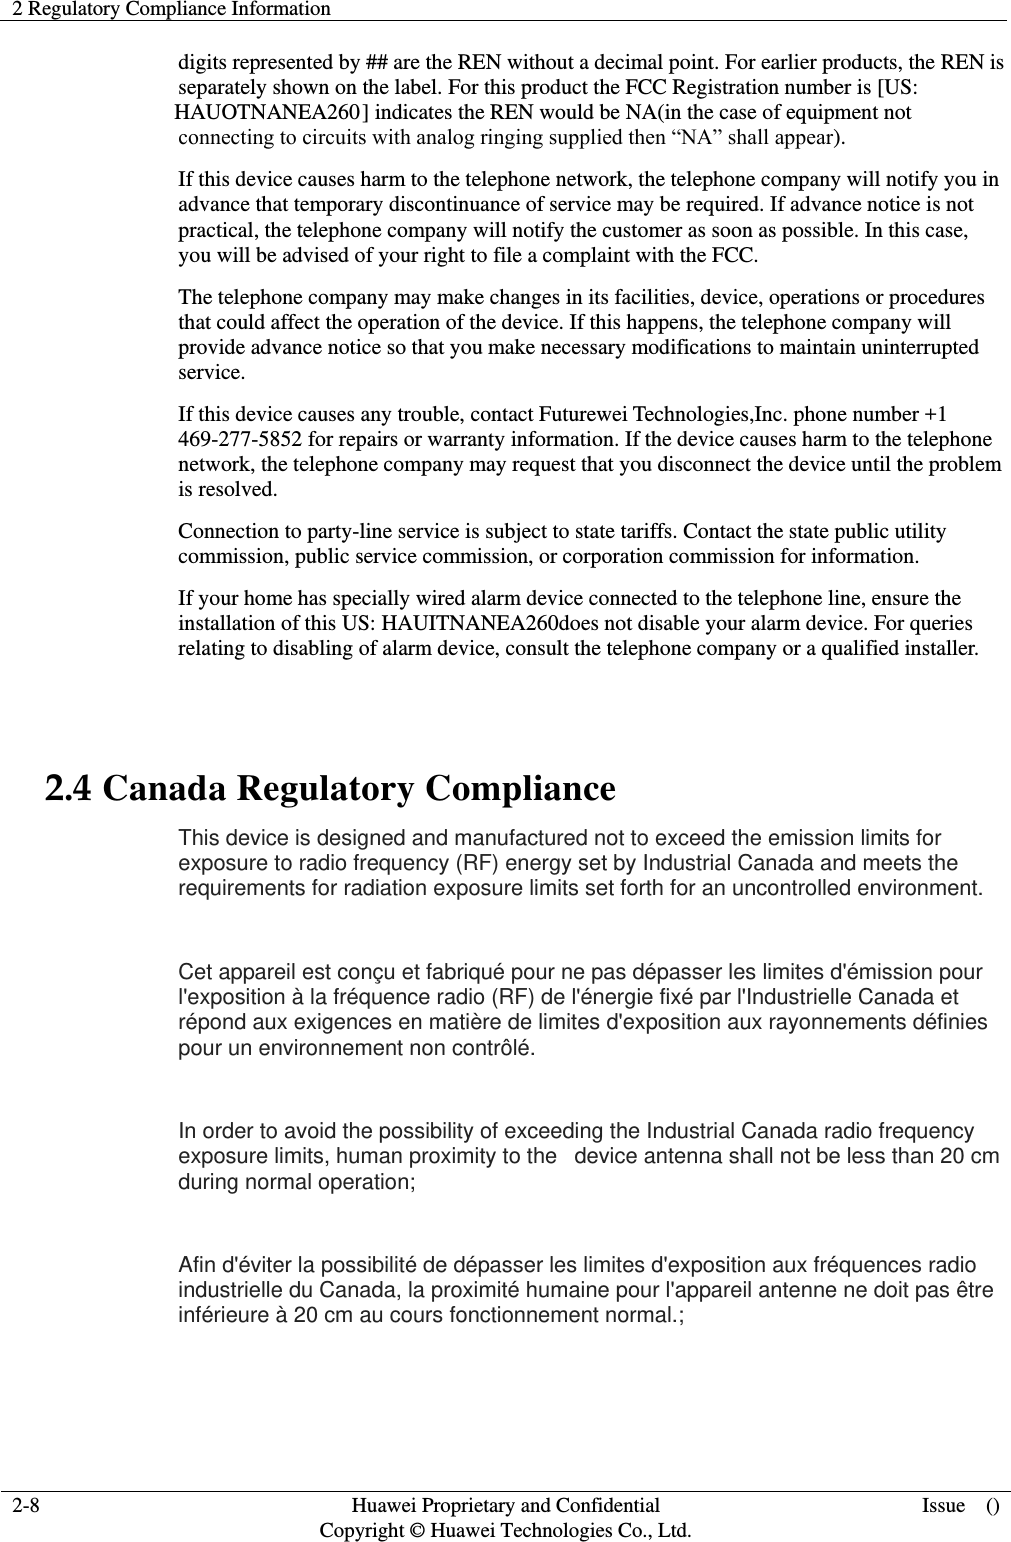 2 Regulatory Compliance Information     2-8  Huawei Proprietary and Confidential                                     Copyright © Huawei Technologies Co., Ltd.  Issue    ()  digits represented by ## are the REN without a decimal point. For earlier products, the REN is separately shown on the label. For this product the FCC Registration number is [US: HAUOTNANEA260] indicates the REN would be NA(in the case of equipment not connecting to circuits with analog ringing supplied then “NA” shall appear). If this device causes harm to the telephone network, the telephone company will notify you in advance that temporary discontinuance of service may be required. If advance notice is not practical, the telephone company will notify the customer as soon as possible. In this case, you will be advised of your right to file a complaint with the FCC. The telephone company may make changes in its facilities, device, operations or procedures that could affect the operation of the device. If this happens, the telephone company will provide advance notice so that you make necessary modifications to maintain uninterrupted service. If this device causes any trouble, contact Futurewei Technologies,Inc. phone number +1 469-277-5852 for repairs or warranty information. If the device causes harm to the telephone network, the telephone company may request that you disconnect the device until the problem is resolved. Connection to party-line service is subject to state tariffs. Contact the state public utility commission, public service commission, or corporation commission for information. If your home has specially wired alarm device connected to the telephone line, ensure the installation of this US: HAUITNANEA260does not disable your alarm device. For queries relating to disabling of alarm device, consult the telephone company or a qualified installer.  2.4 Canada Regulatory Compliance This device is designed and manufactured not to exceed the emission limits for exposure to radio frequency (RF) energy set by Industrial Canada and meets the requirements for radiation exposure limits set forth for an uncontrolled environment.    Cet appareil est conçu et fabriqué pour ne pas dépasser les limites d&apos;émission pour l&apos;exposition à la fréquence radio (RF) de l&apos;énergie fixé par l&apos;Industrielle Canada et répond aux exigences en matière de limites d&apos;exposition aux rayonnements définies pour un environnement non contrôlé.    In order to avoid the possibility of exceeding the Industrial Canada radio frequency exposure limits, human proximity to the   device antenna shall not be less than 20 cm during normal operation;    Afin d&apos;éviter la possibilité de dépasser les limites d&apos;exposition aux fréquences radio industrielle du Canada, la proximité humaine pour l&apos;appareil antenne ne doit pas être inférieure à 20 cm au cours fonctionnement normal.;   